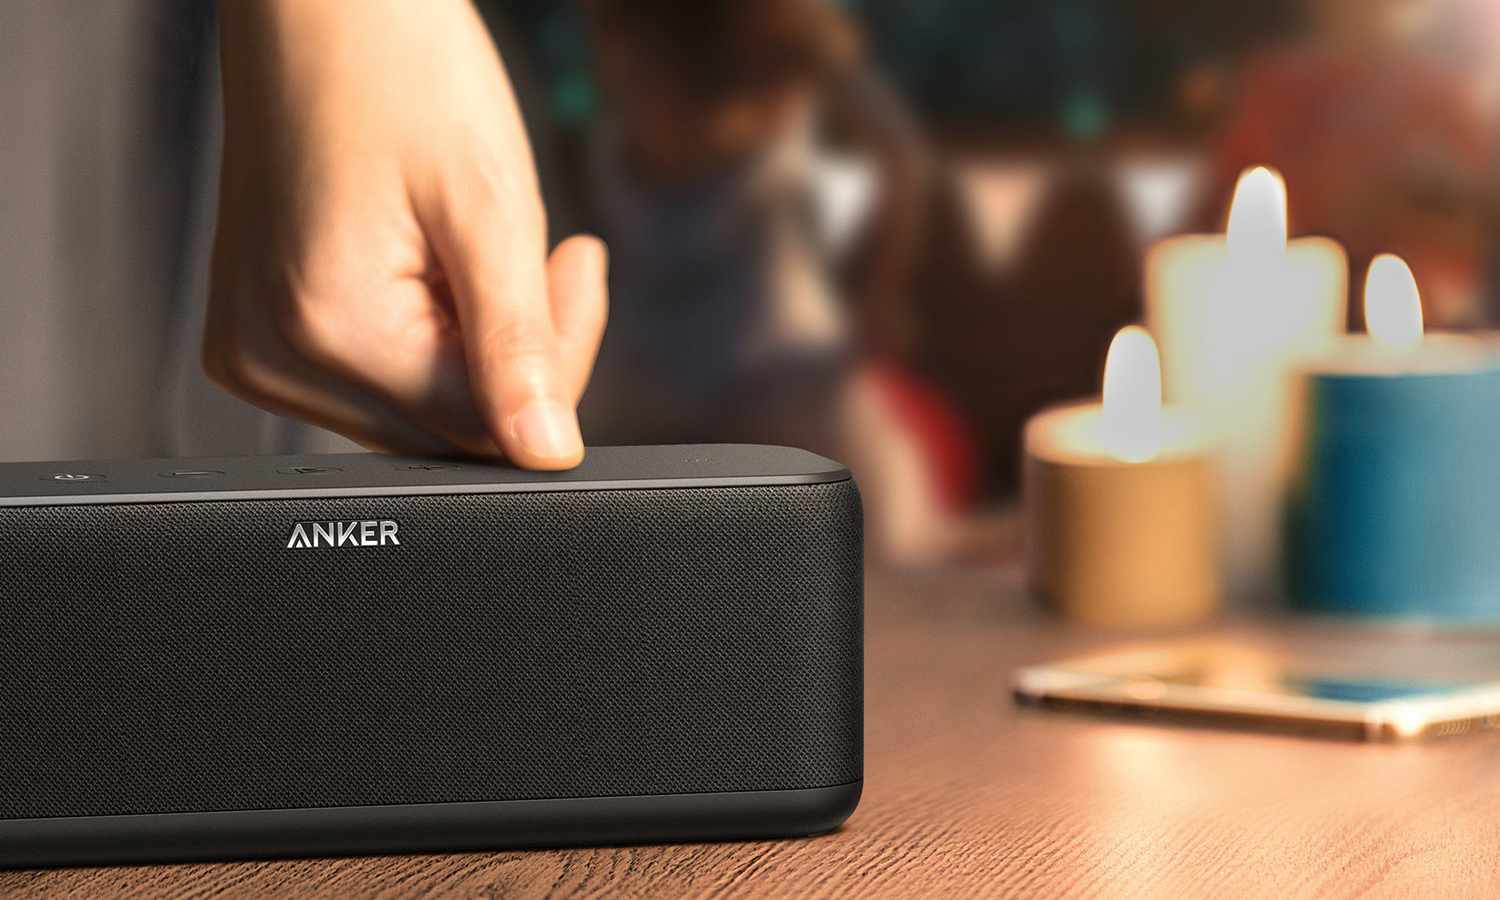 Anker Soundcore Boost speaker detailed review - so punchy